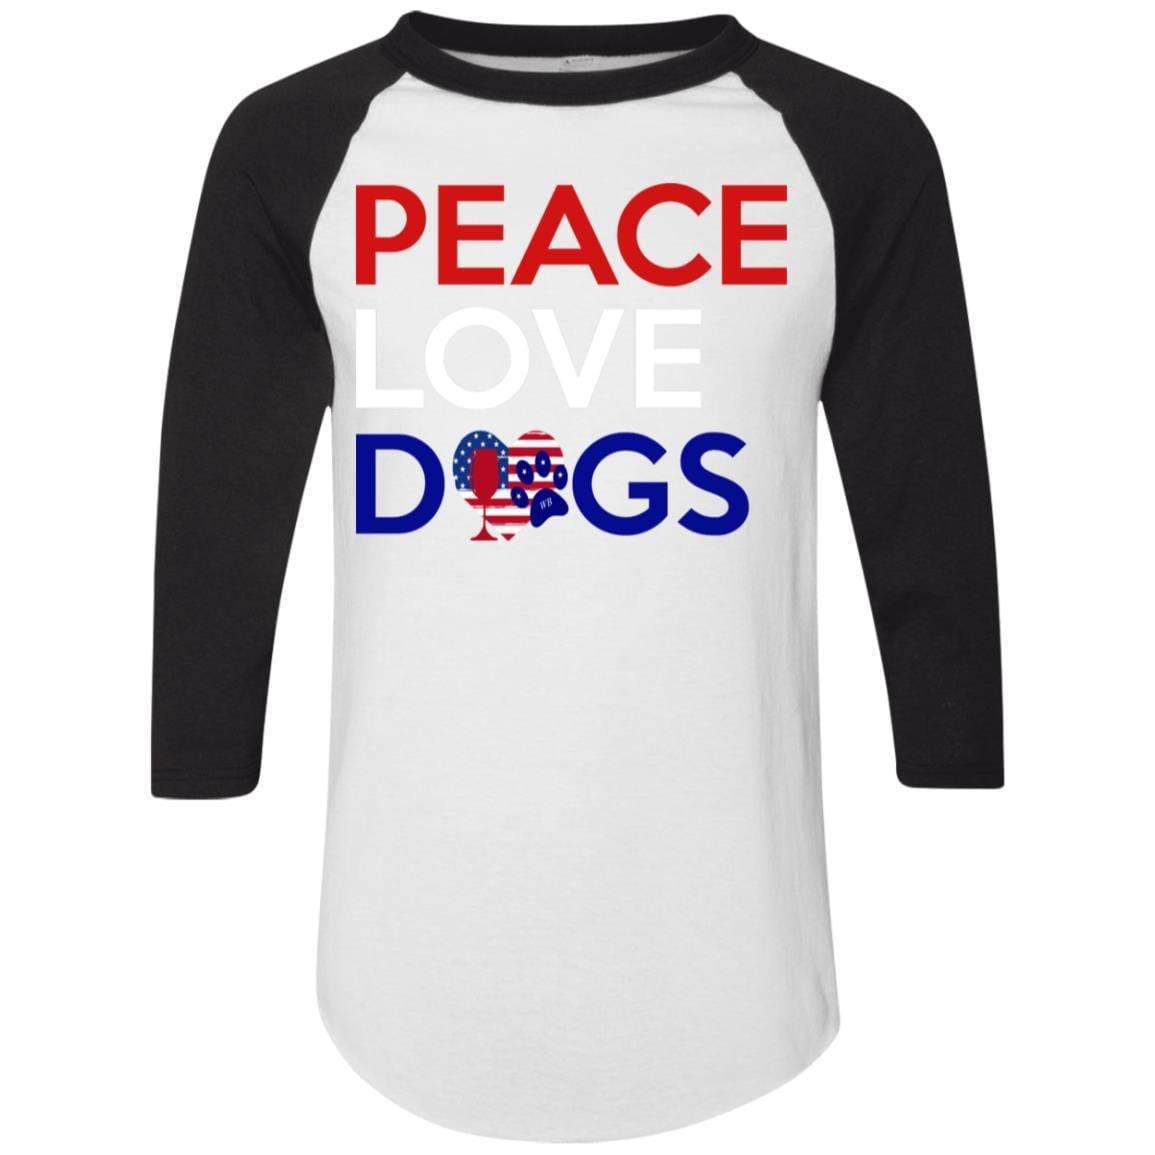 T-Shirts White/Black / S WineyBitches.Co Peace Love Dogs Colorblock Raglan Jersey WineyBitchesCo